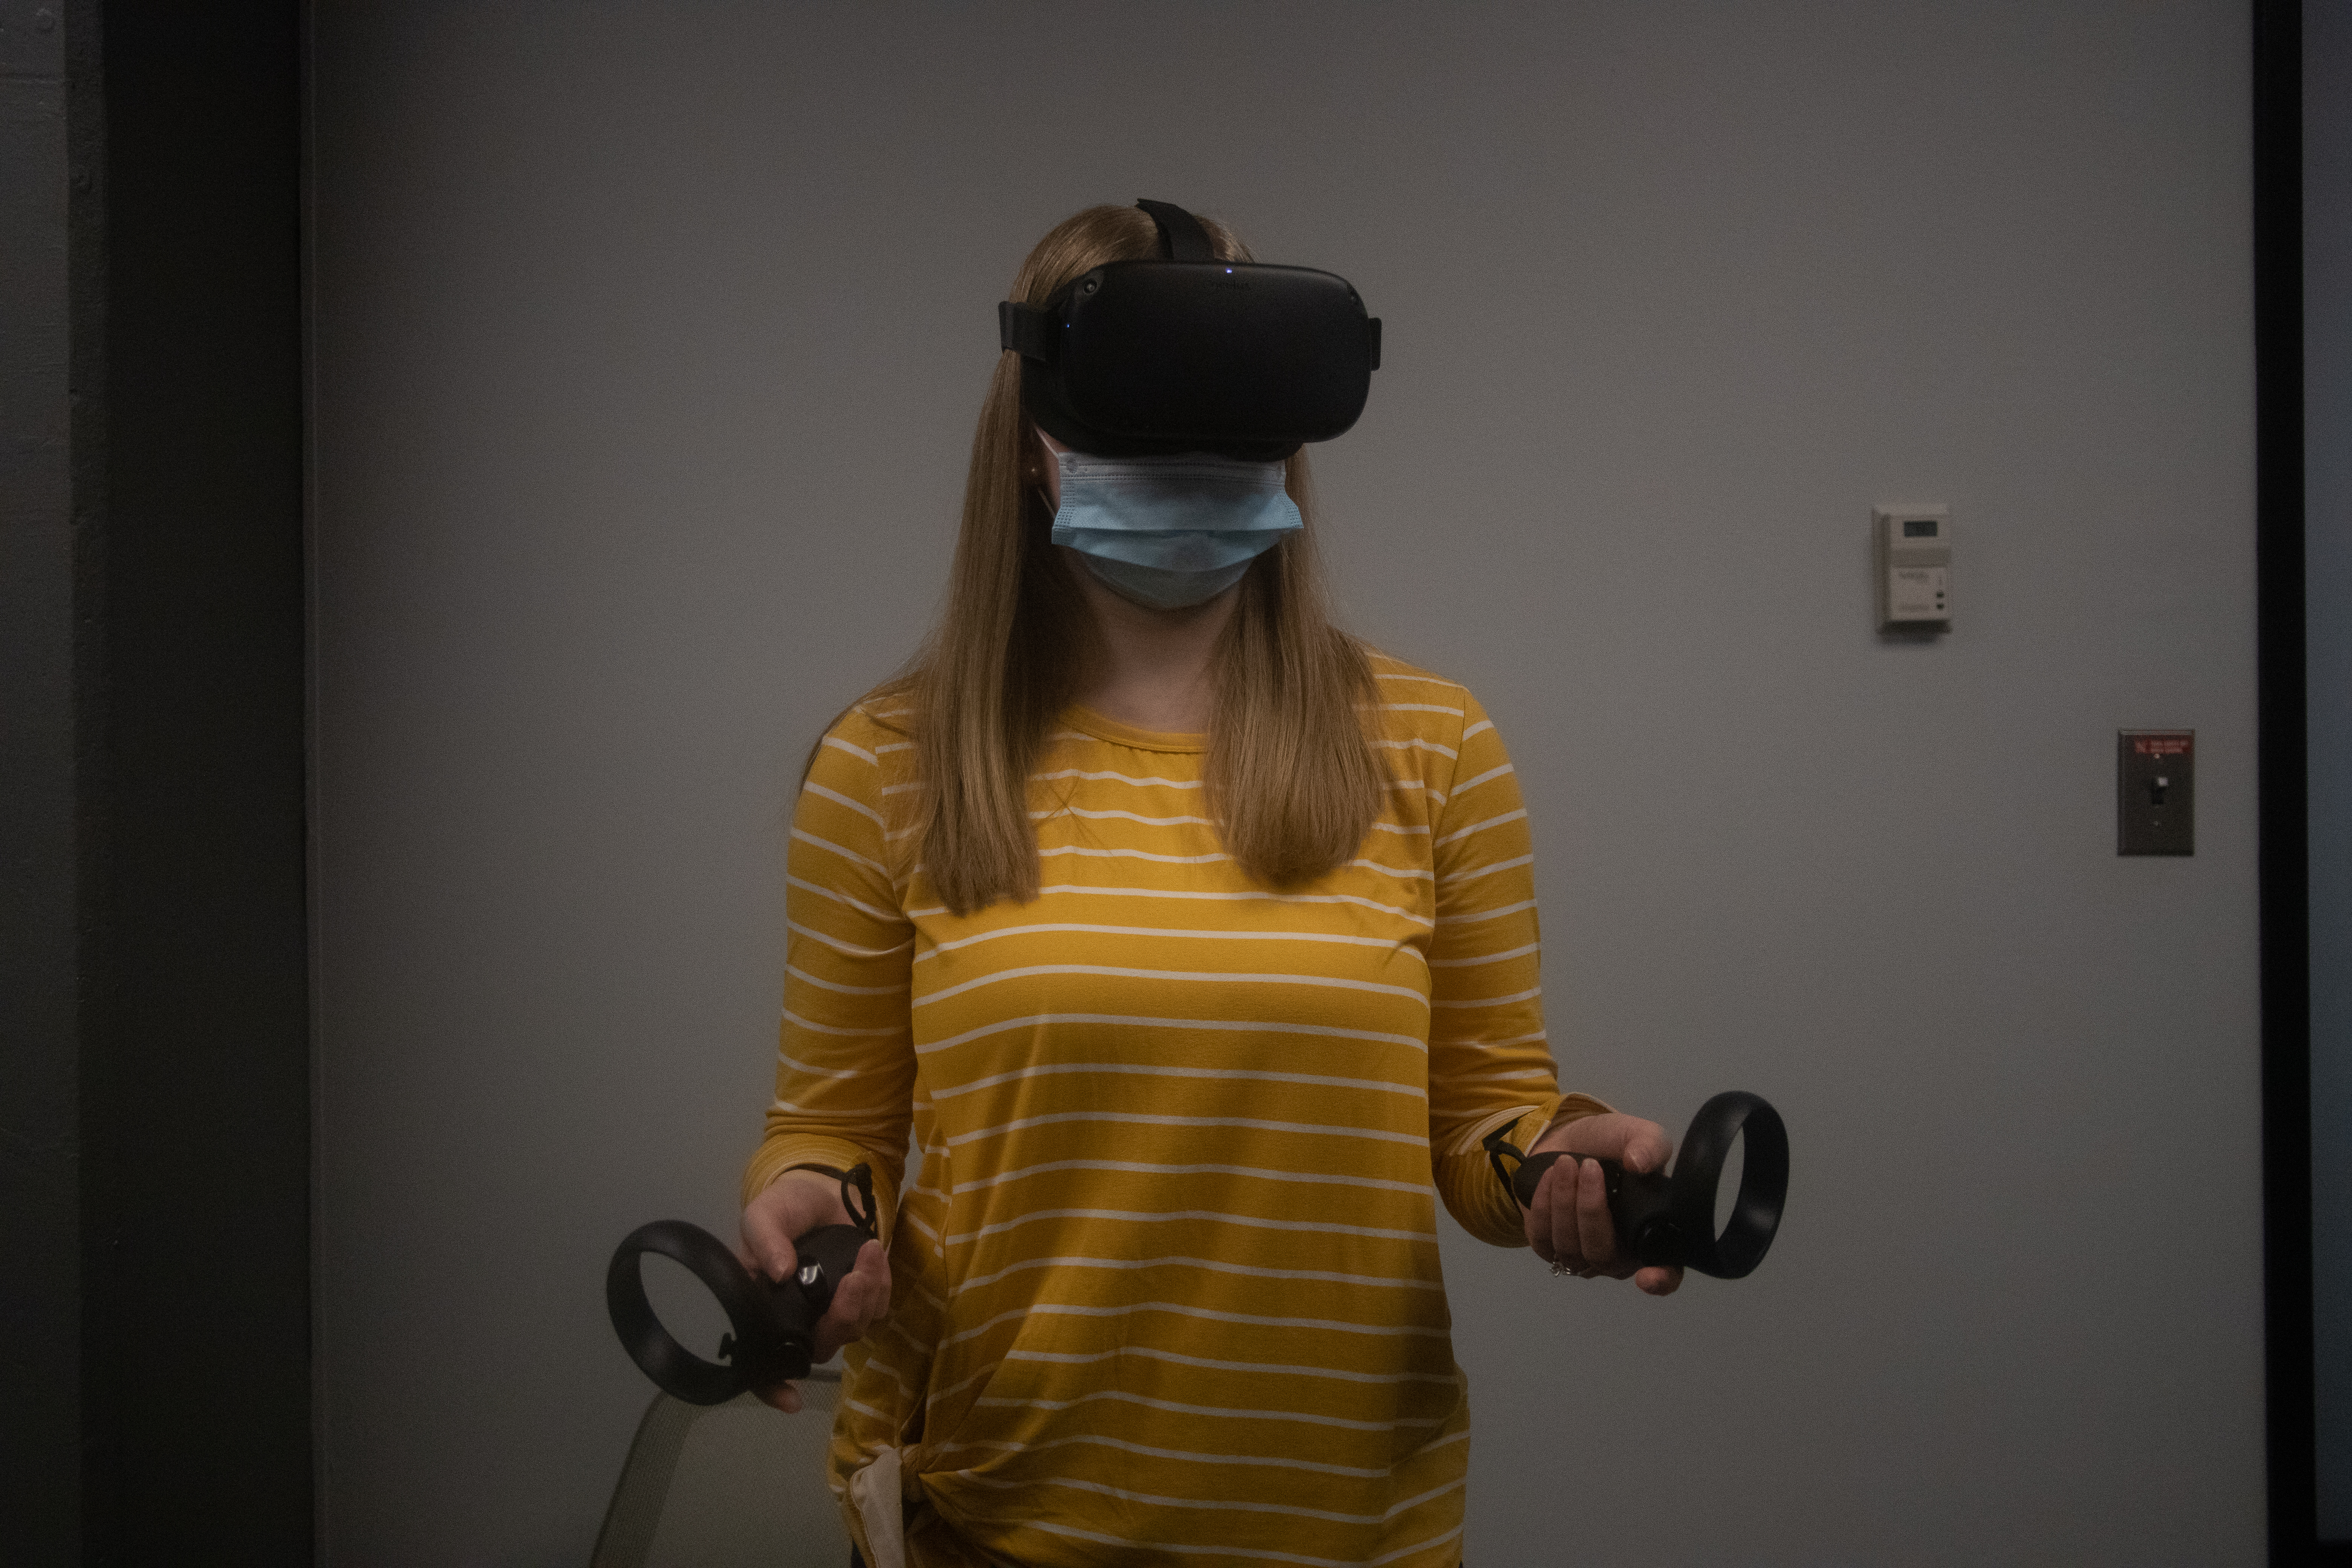 Photo Credit: Photo of student with VR headset